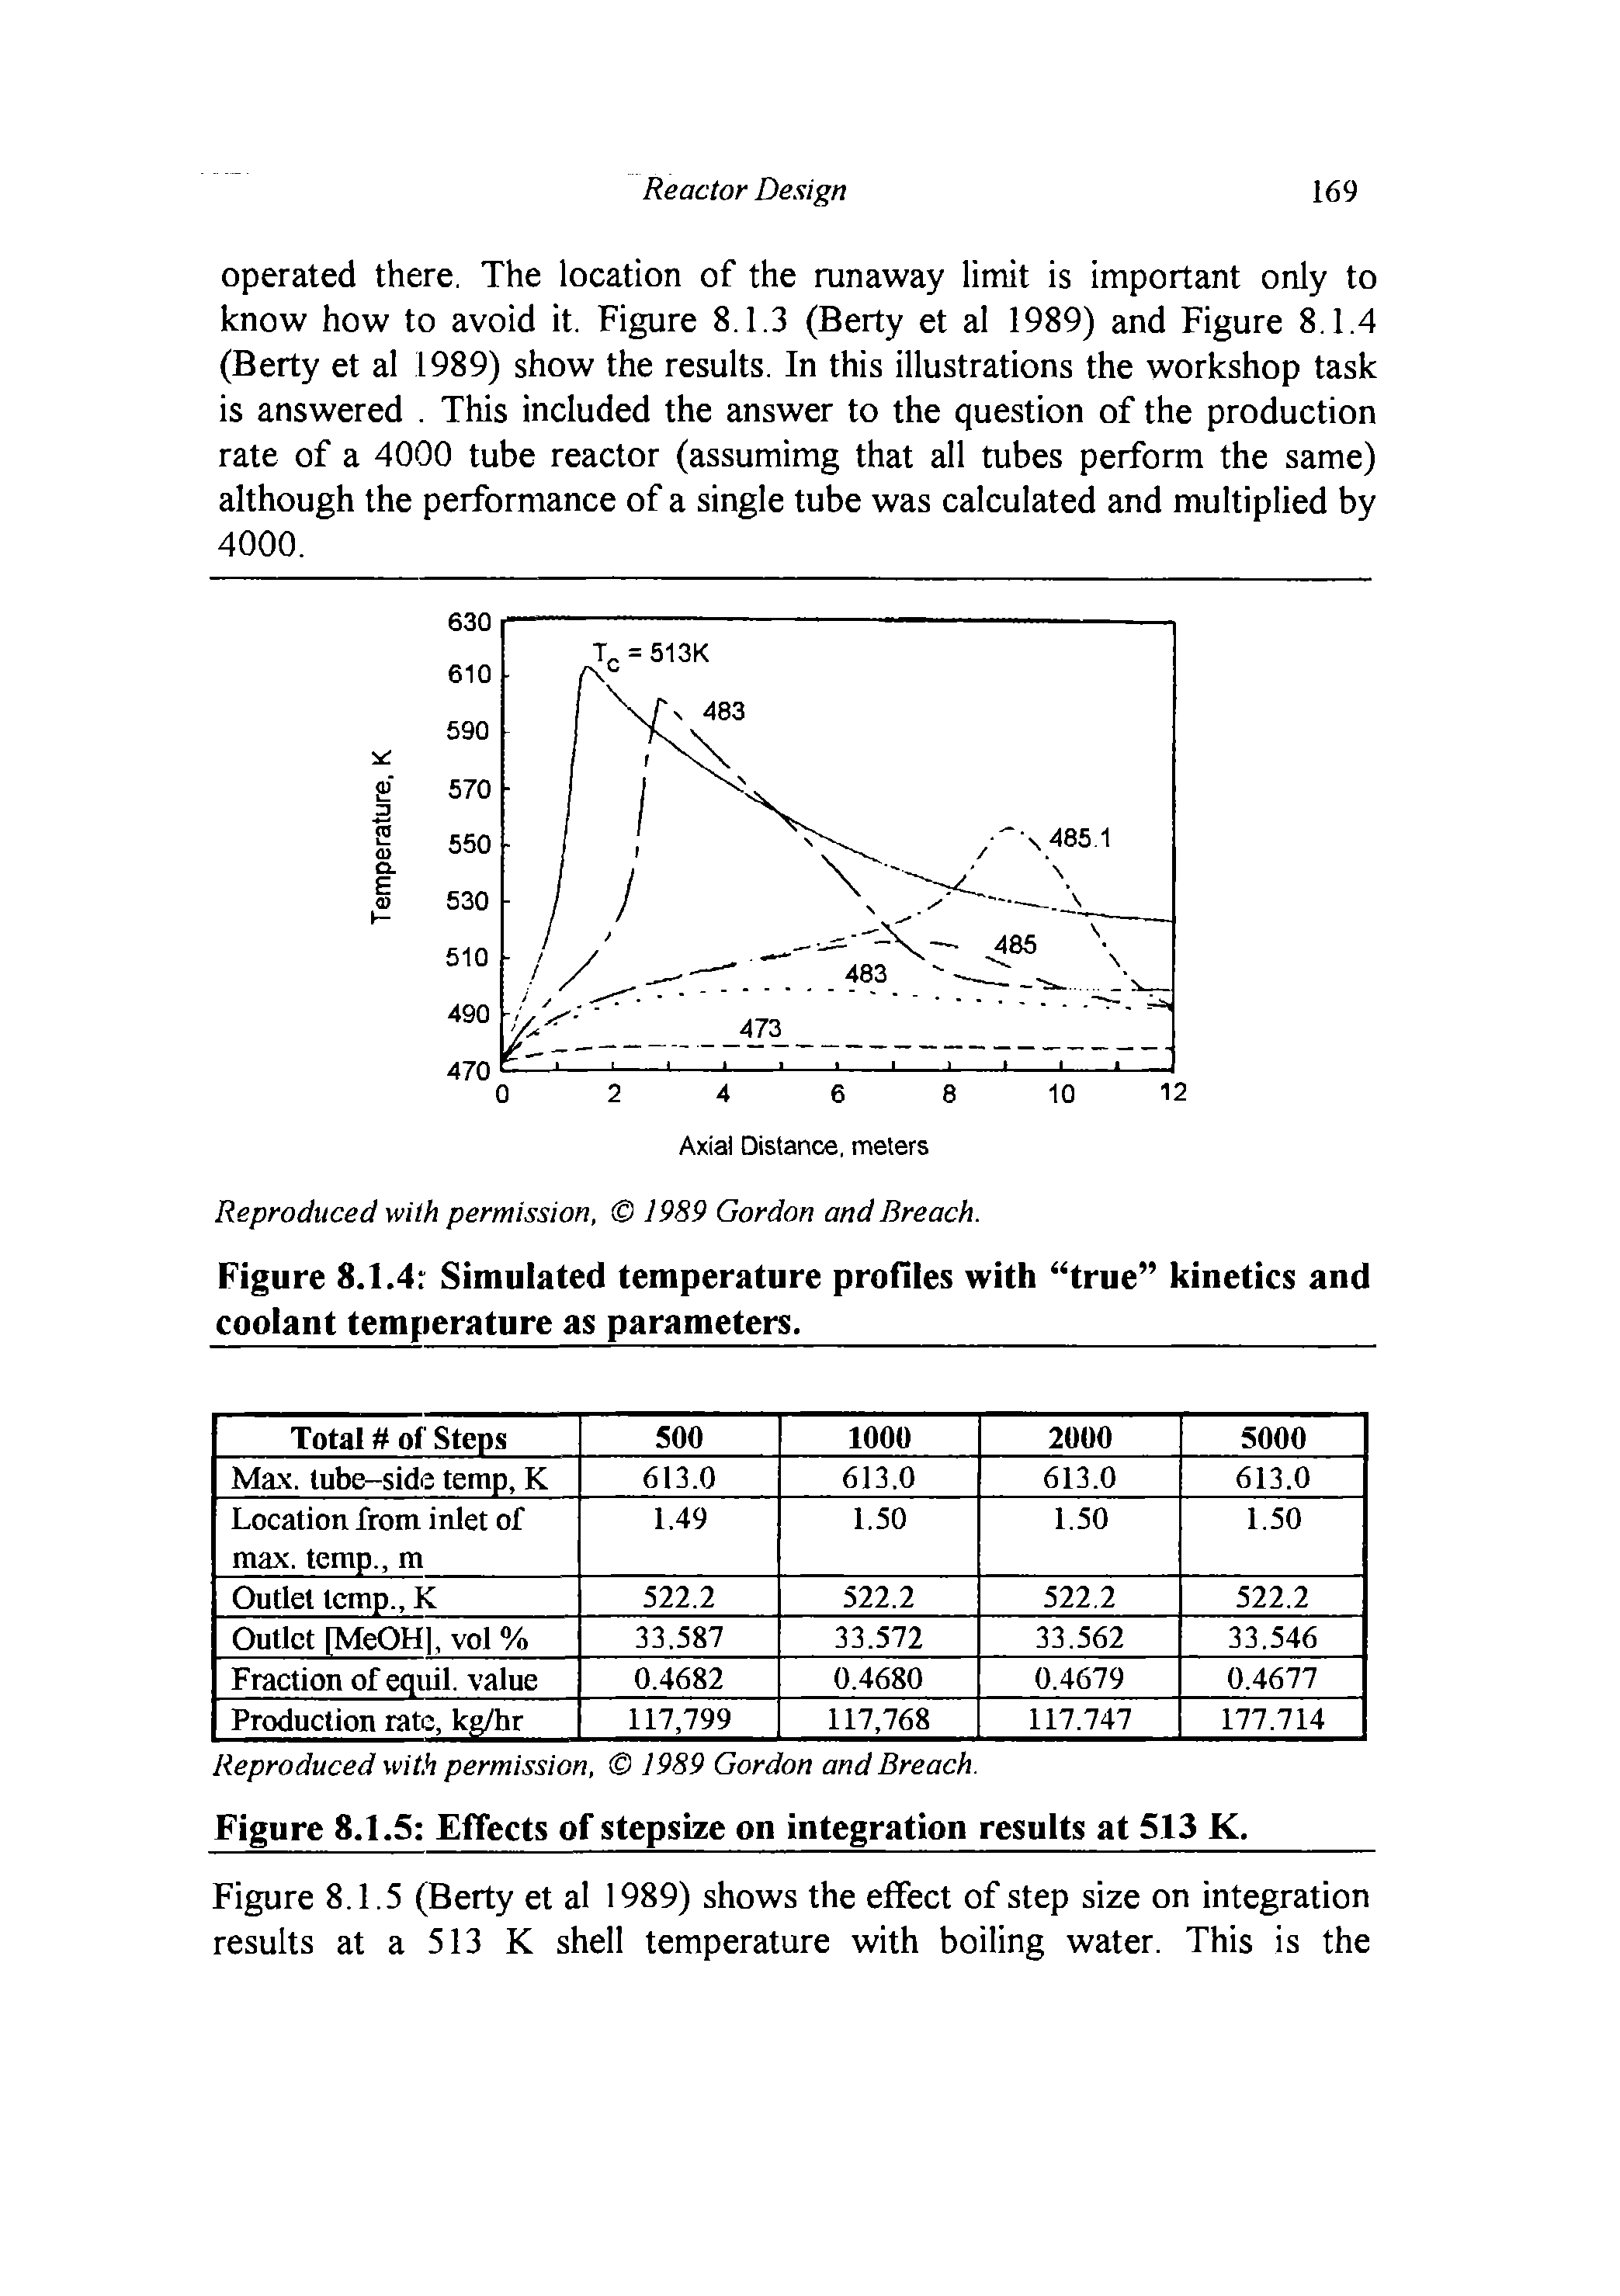 Figure 8.1.5 (Berty et al 1989) shows the effect of step size on integration results at a 513 K shell temperature with boiling water. This is the...